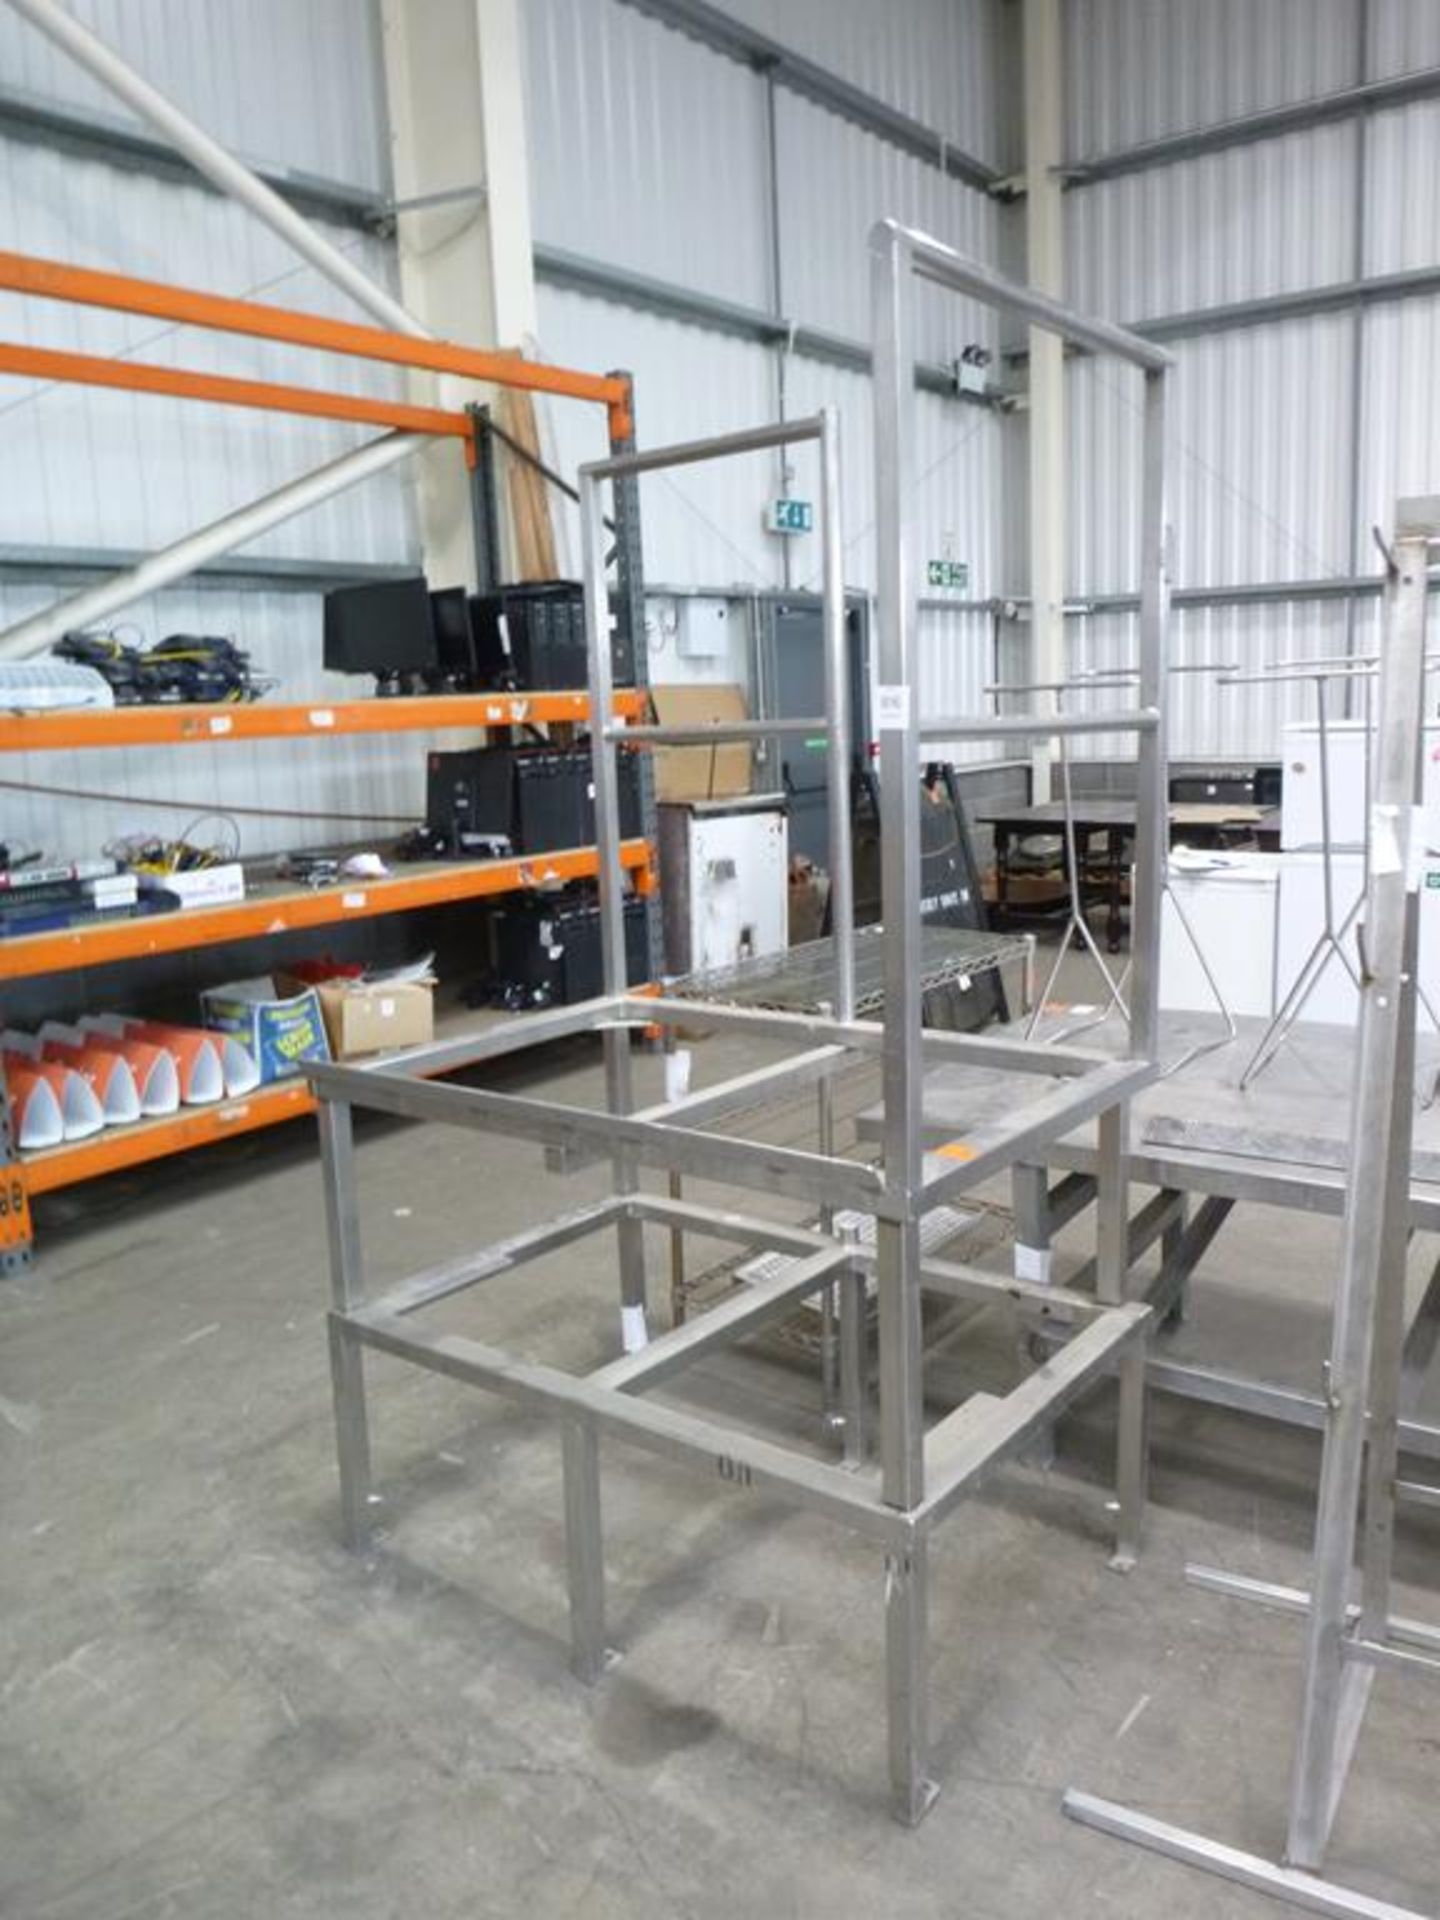 * Rectangular Stainless Steel Box Section Fabricated Frame Work overall dimensions H 2000mm, W